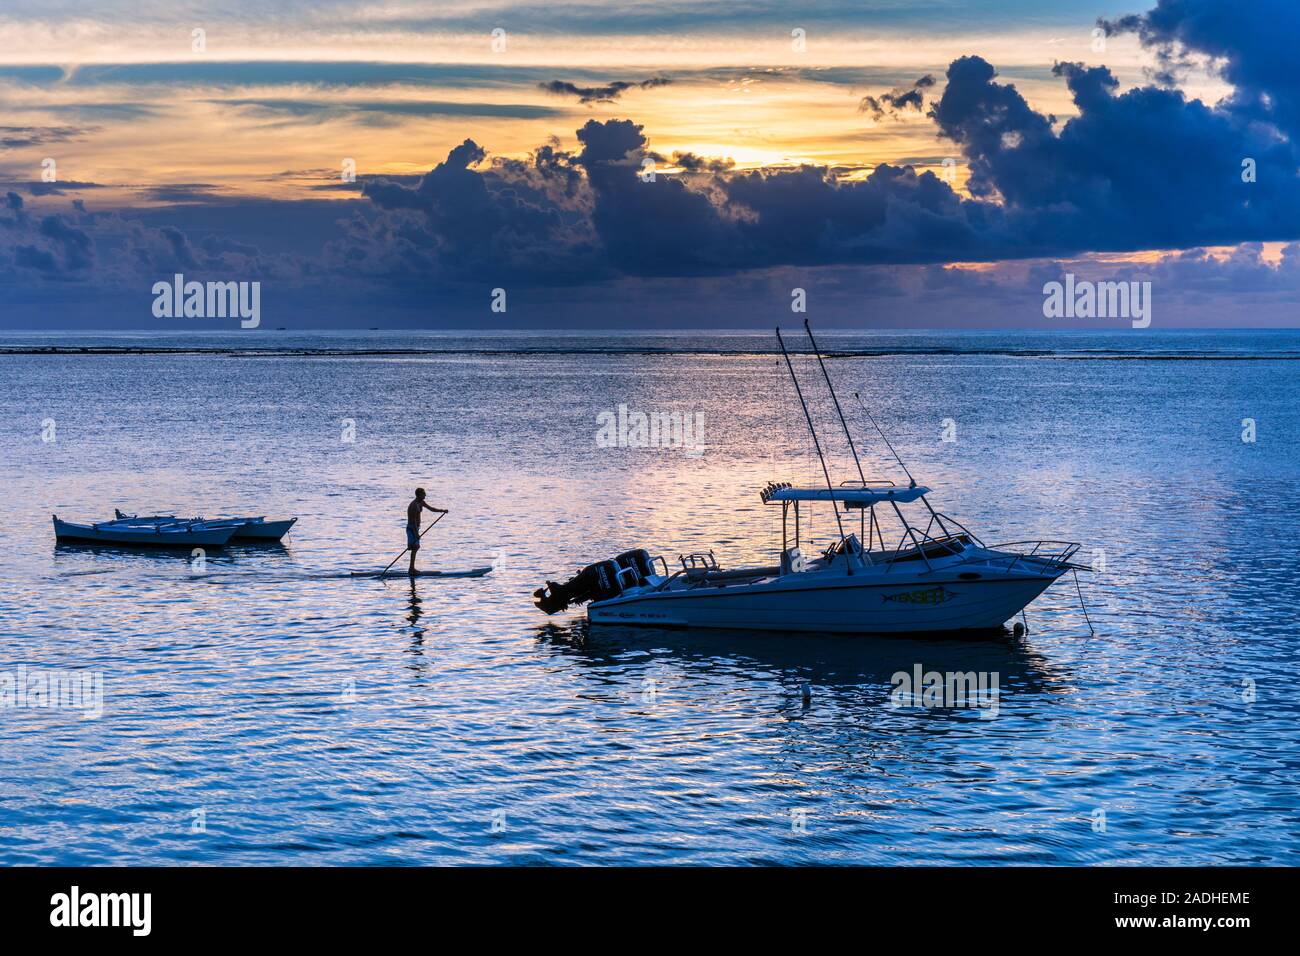 Stand-up paddle boarder off Riviere Noir or Black River beach, Tamarin, Mauritius, Mascarene Islands. Stock Photo